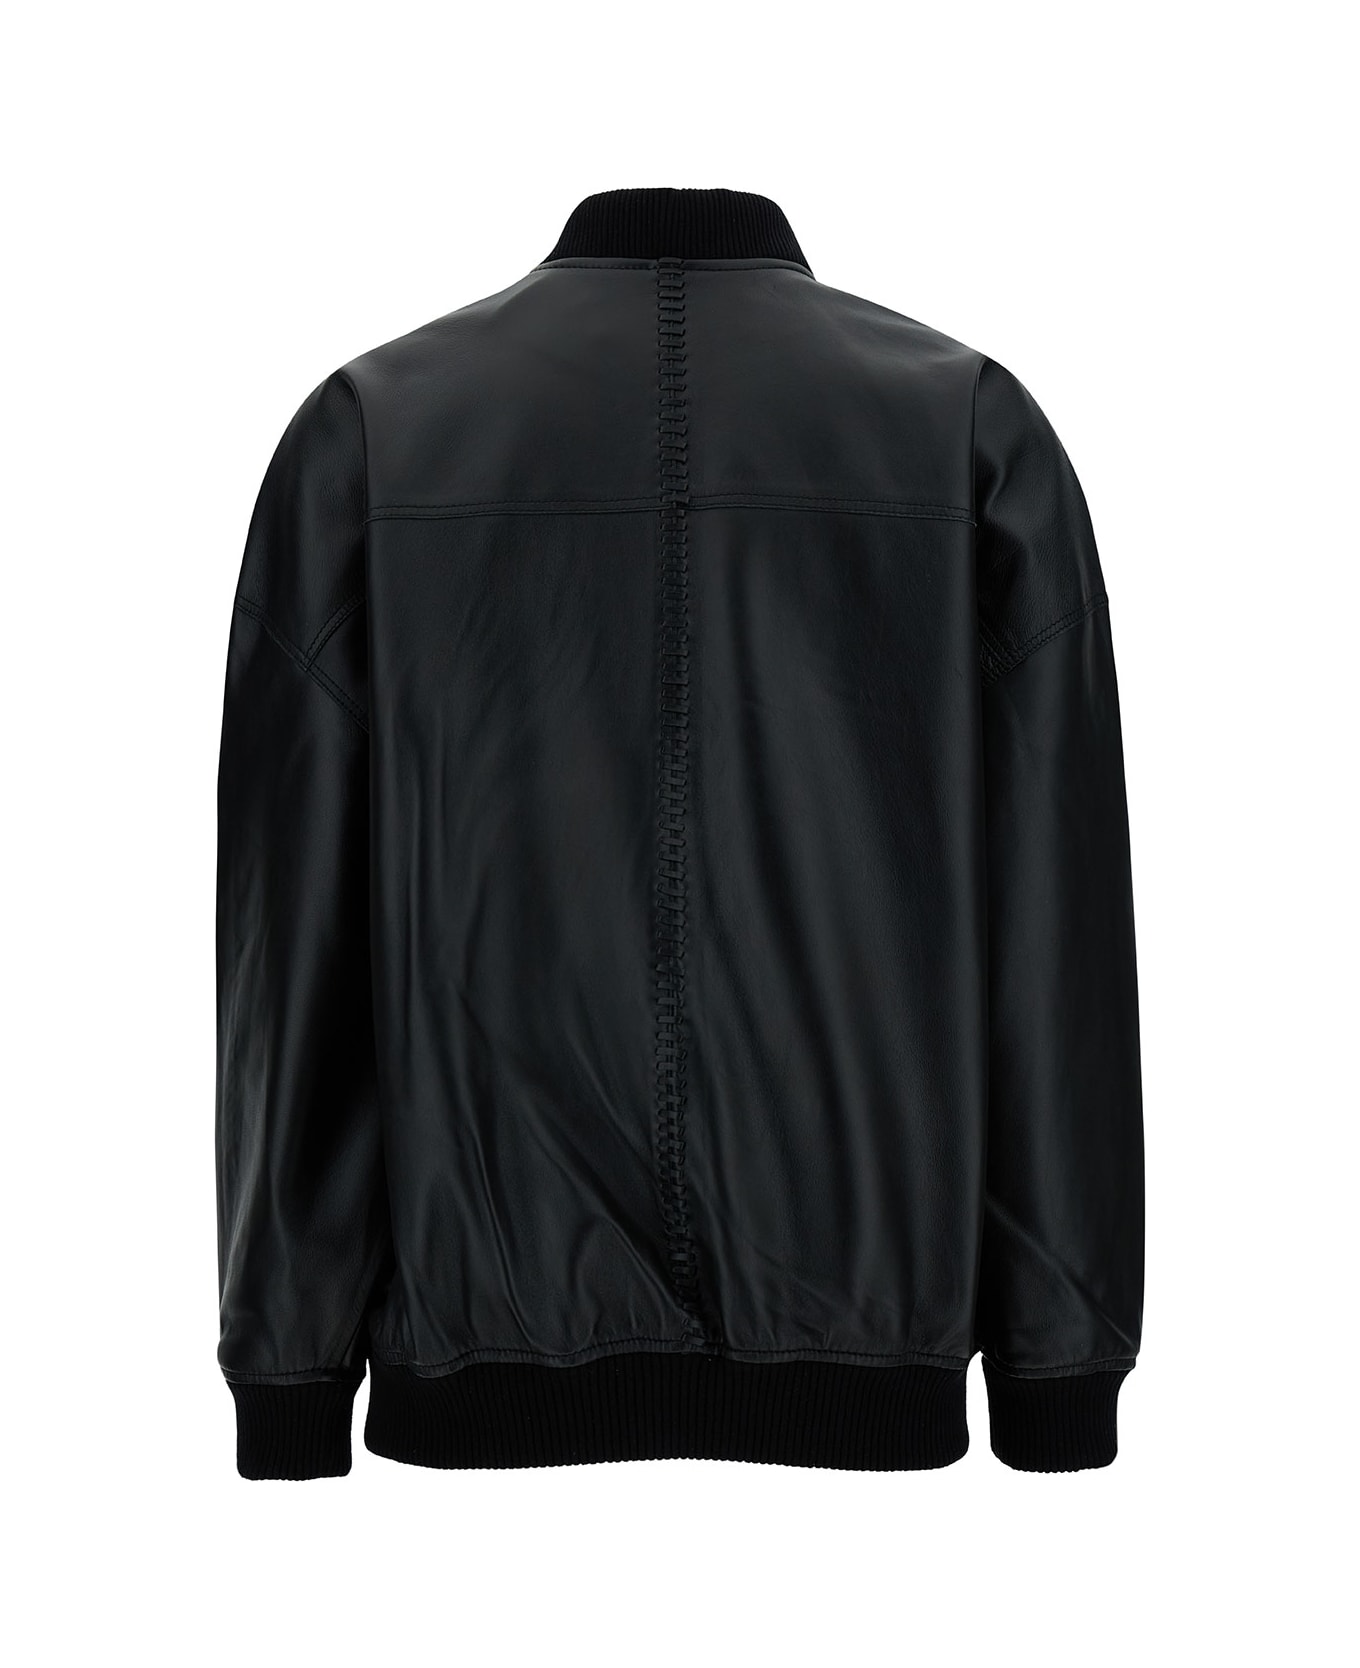 Federica Tosi Black Bomber Jacket With Ribbed Trim In Leather Woman - Black ジャケット